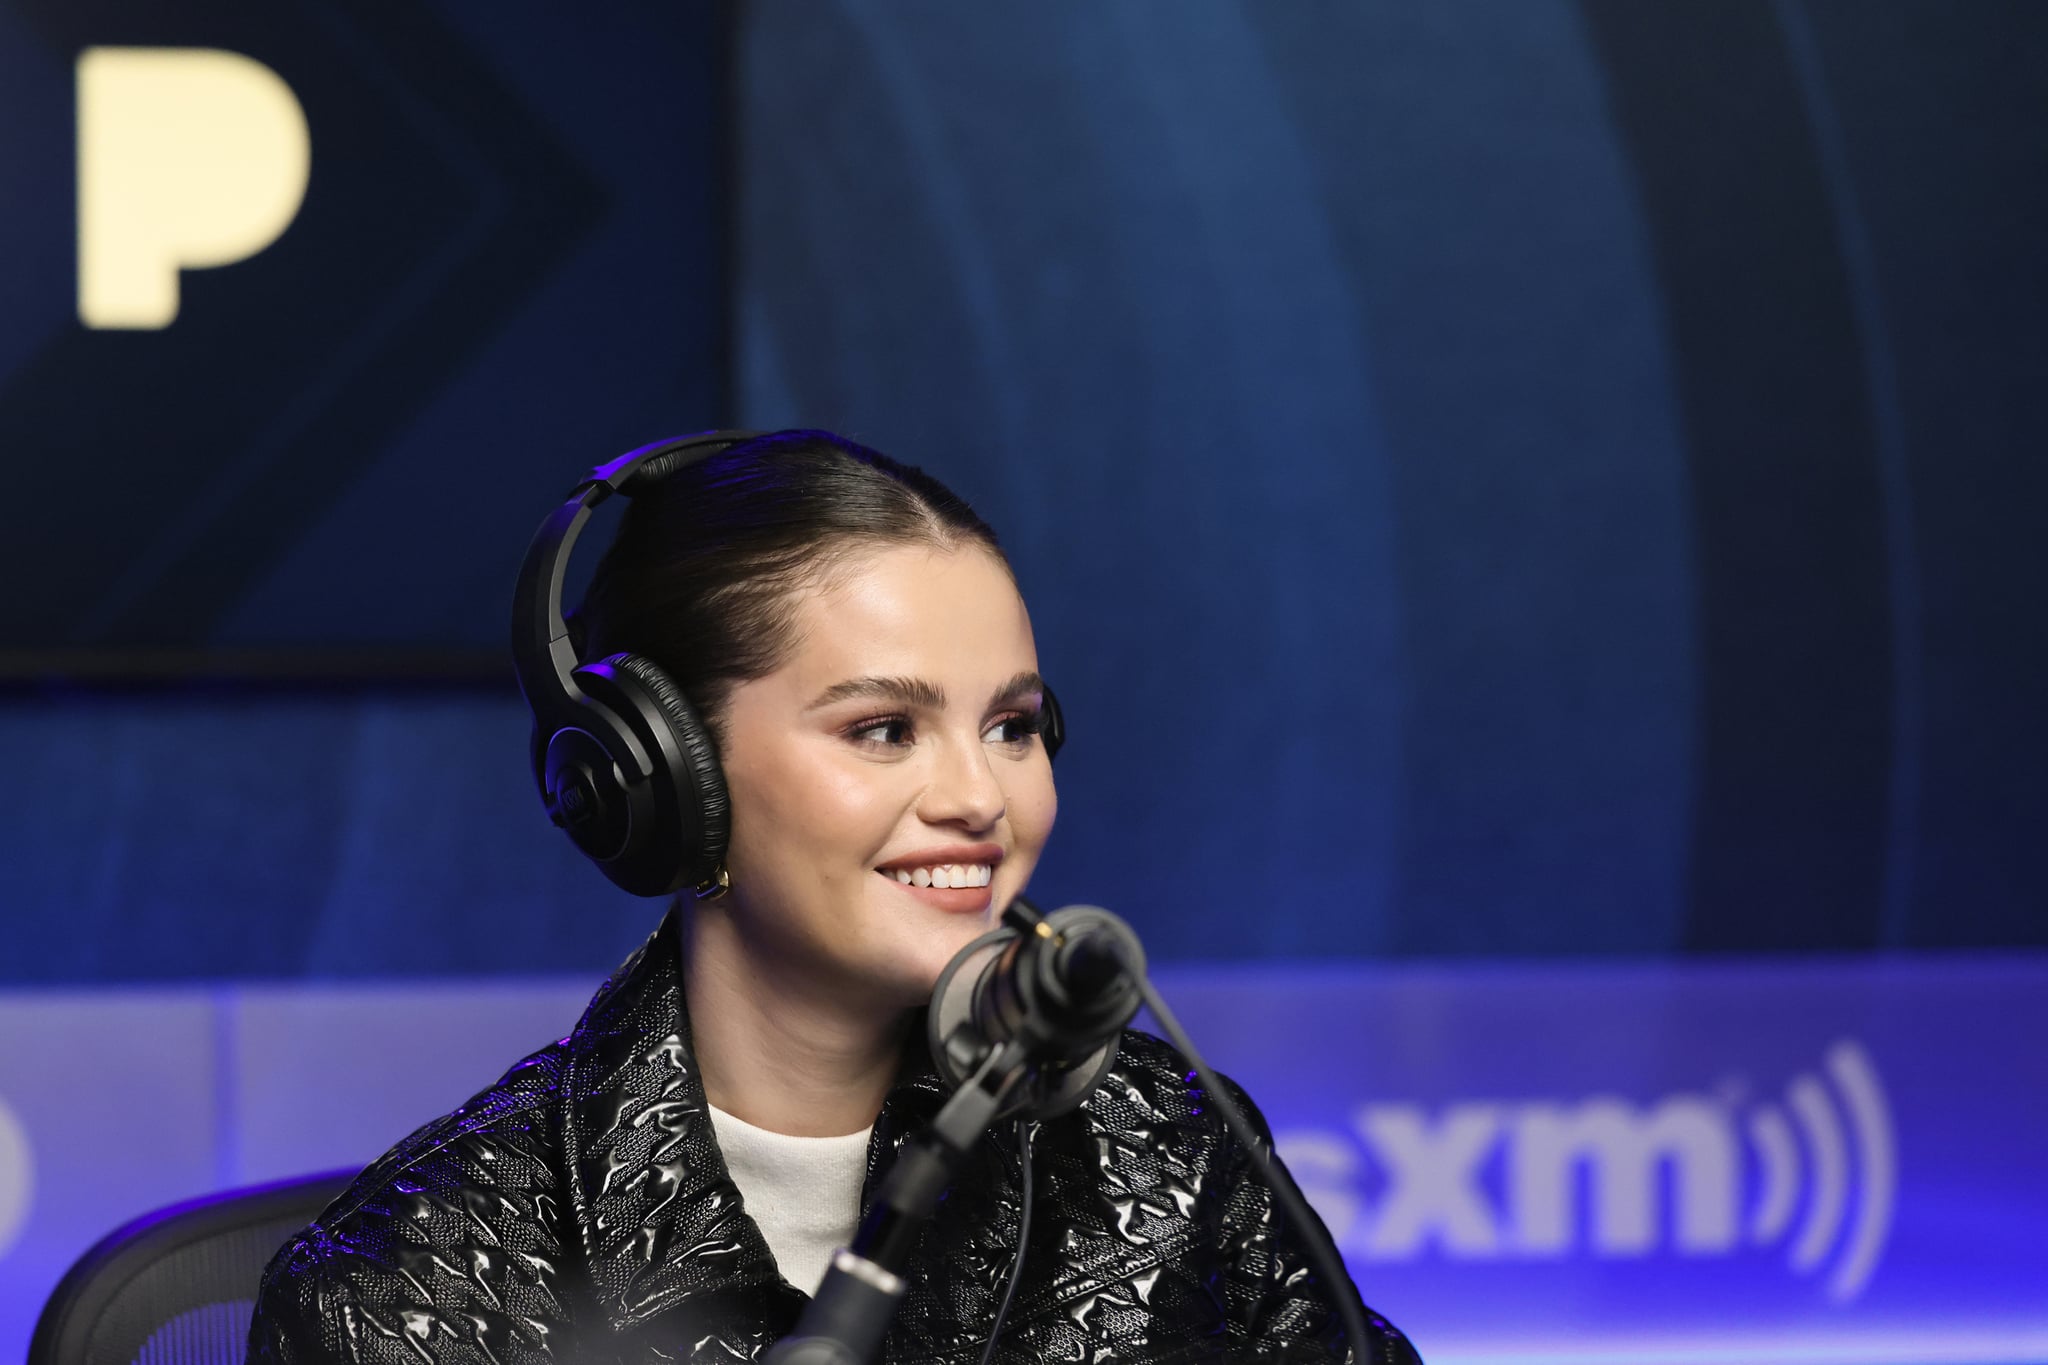 LOS ANGELES, CALIFORNIA - AUGUST 30: Selena Gomez visits the SiriusXM Studios in Los Angeles at SiriusXM Studios on August 30, 2023 in Los Angeles, California. (Photo by Rodin Eckenroth/Getty Images for SiriusXM)